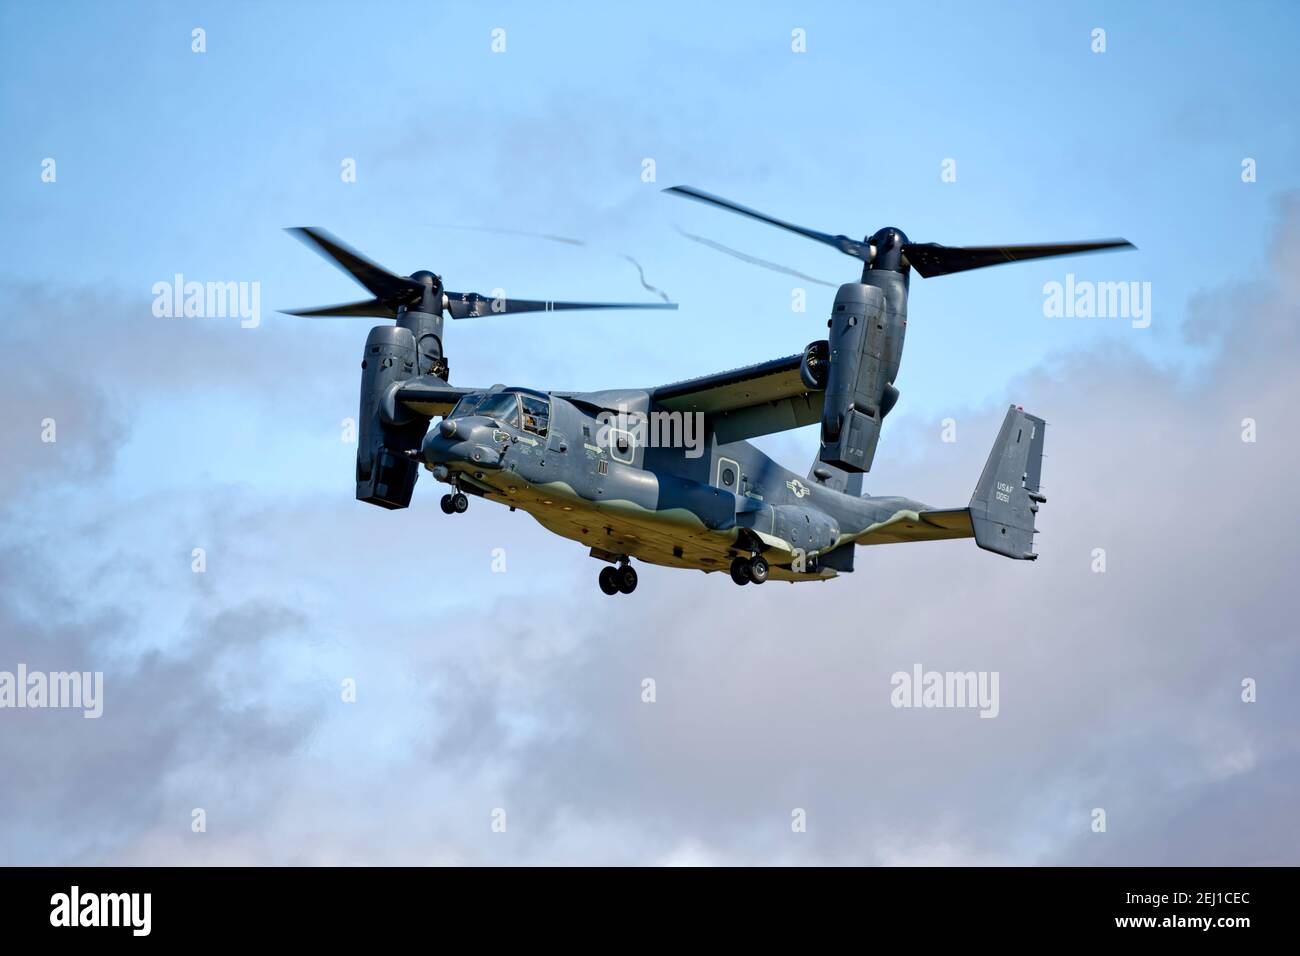 RAF Fairford, Gloucestershire, UK - July 20 2019: A United States Air Force Bell Boeing CV-22B Osprey tiltrotor military aircraft at the 2019 RIAT Stock Photo